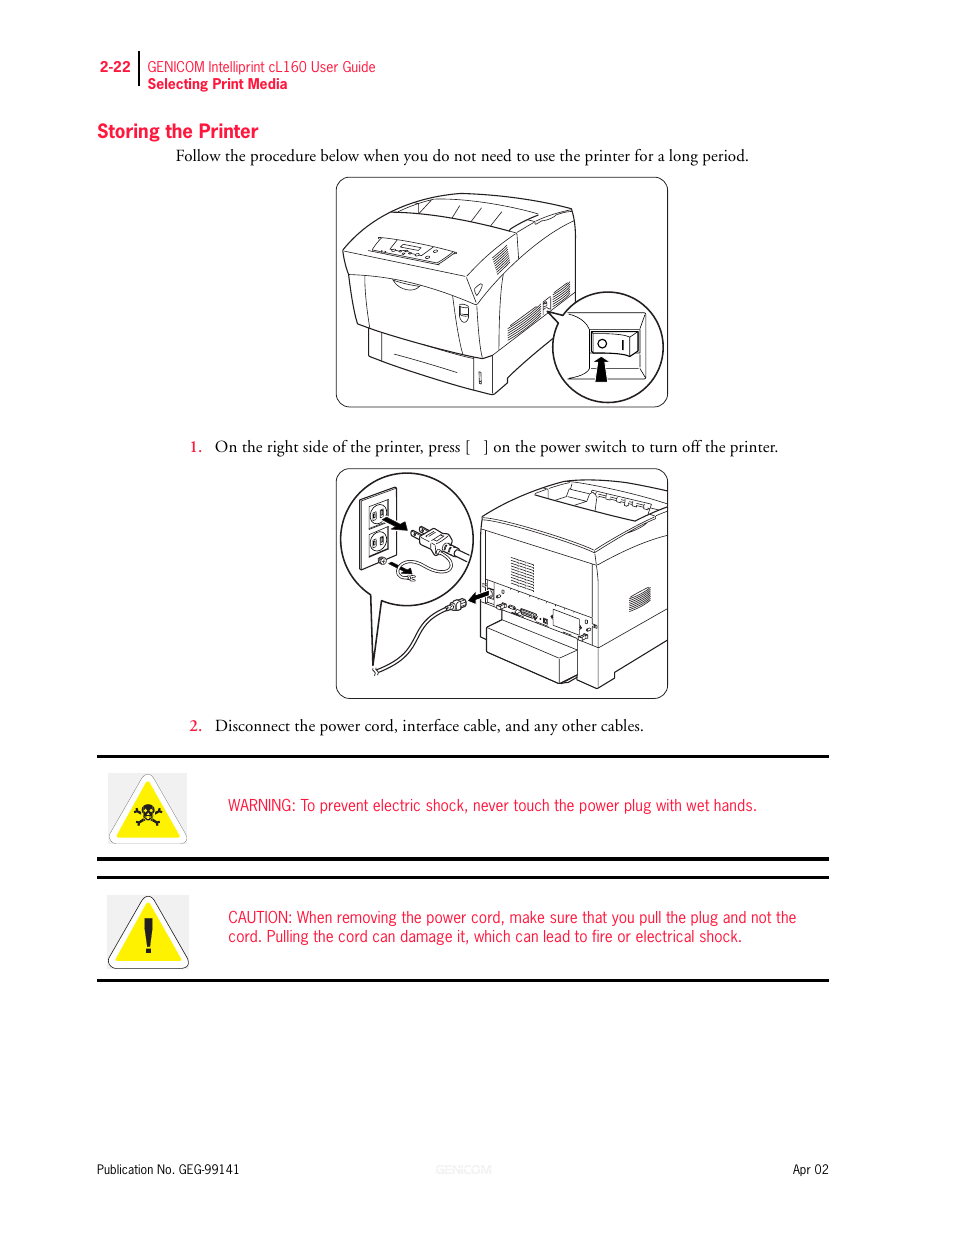 Storing the printer | Genicom cL160 User Manual | Page 74 / 216